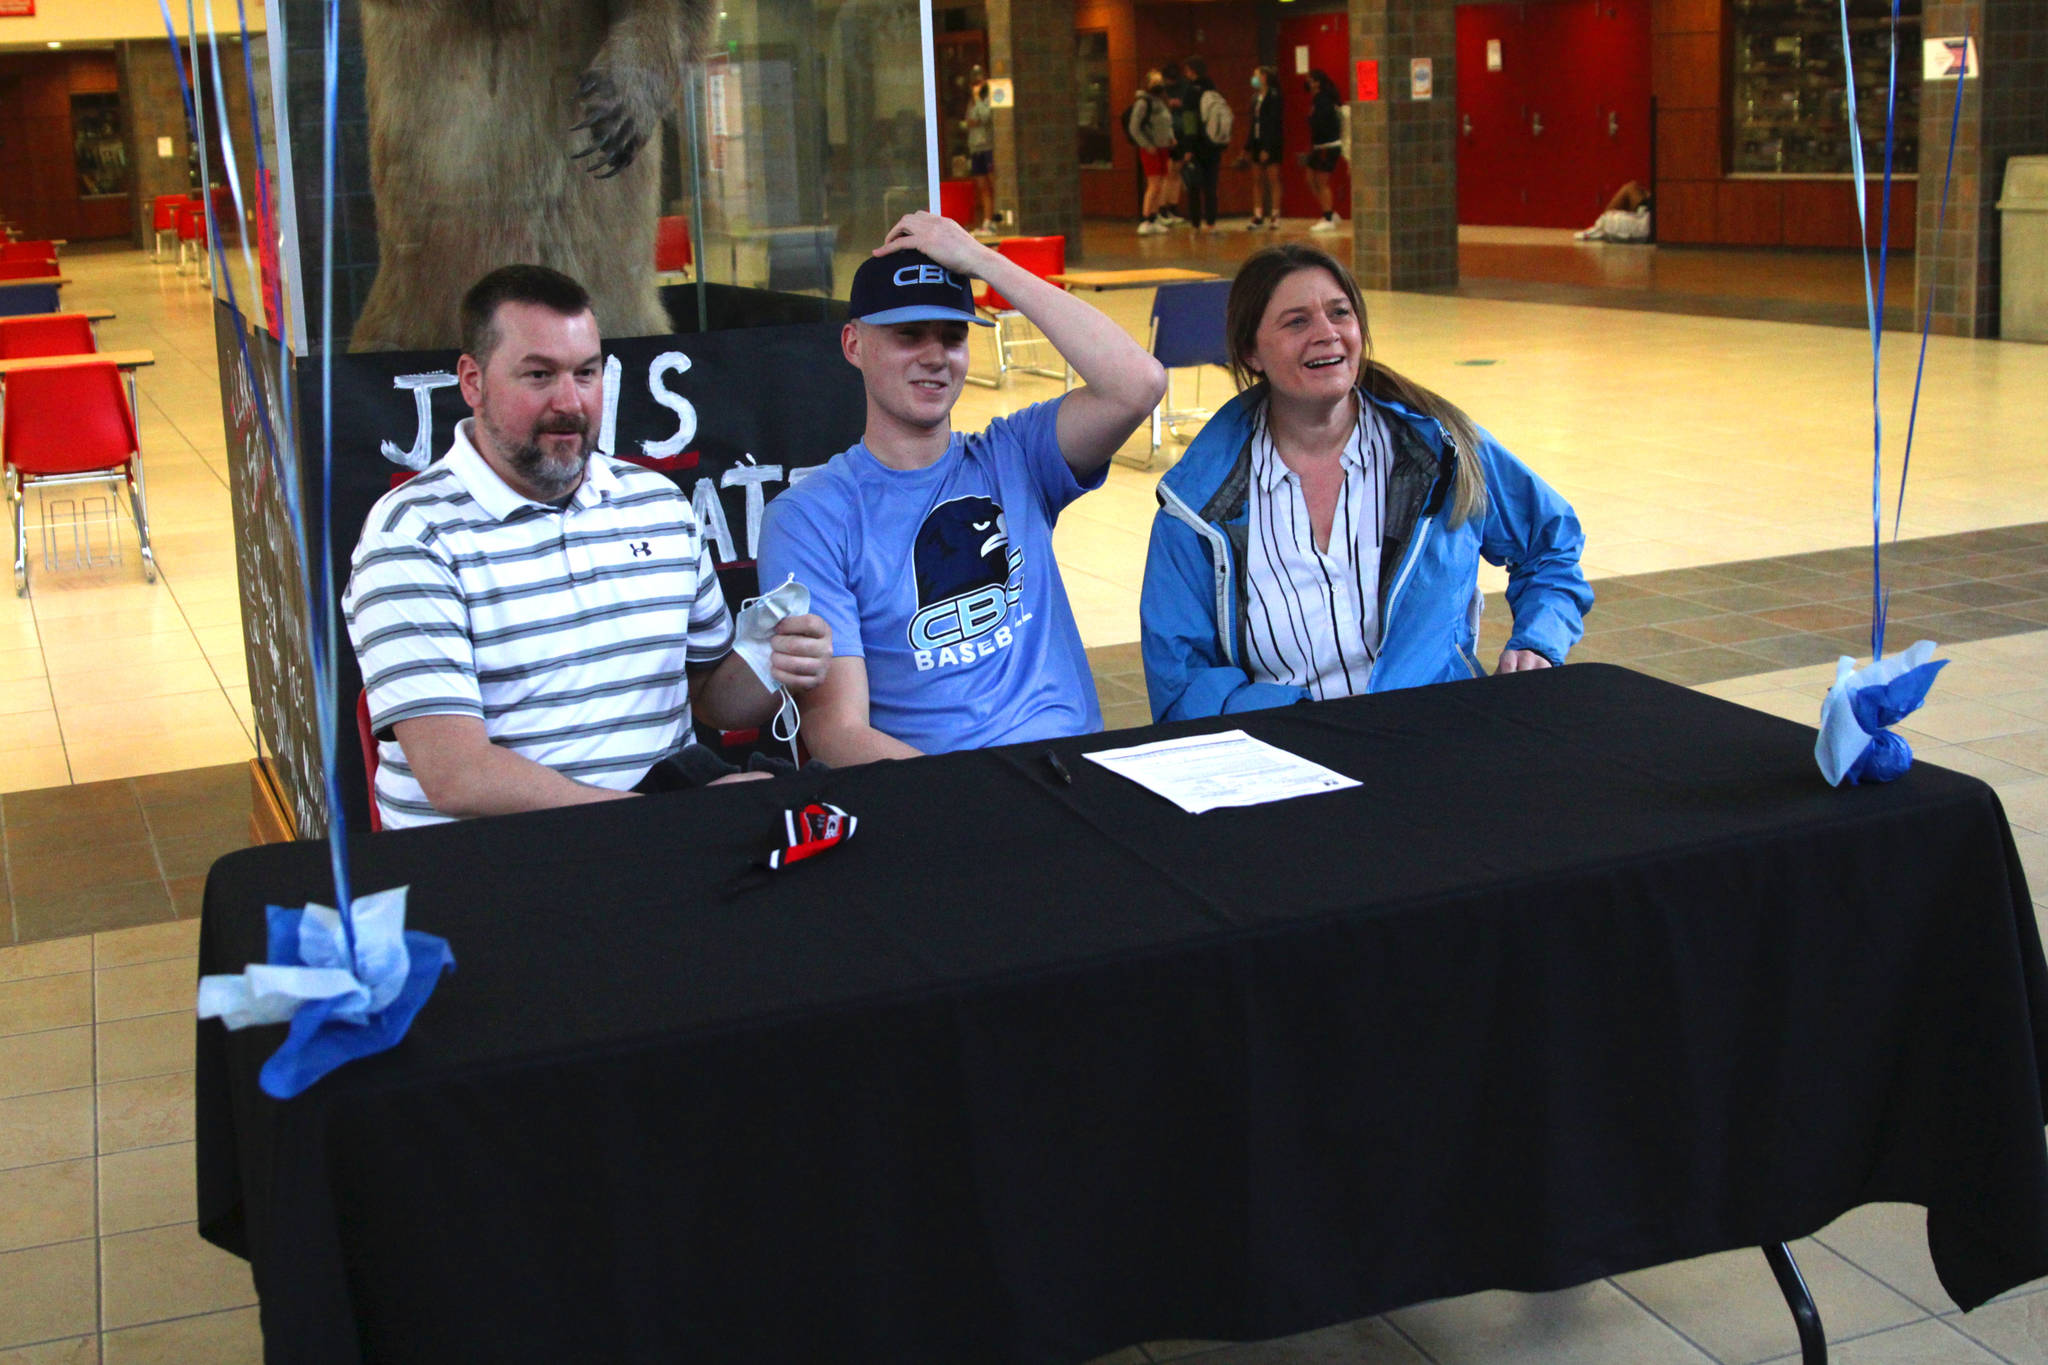 Juneau-Douglas High School Yadaa.at Kalé senior Garrett Bryant, sitting with parents Ronnie Bryant and Blair Ramsdell, signed his letter of intent to play baseball for Columbia Basin College at JDHS on March 11, 2021. (Michael S. Lockett / Juneau Empire)